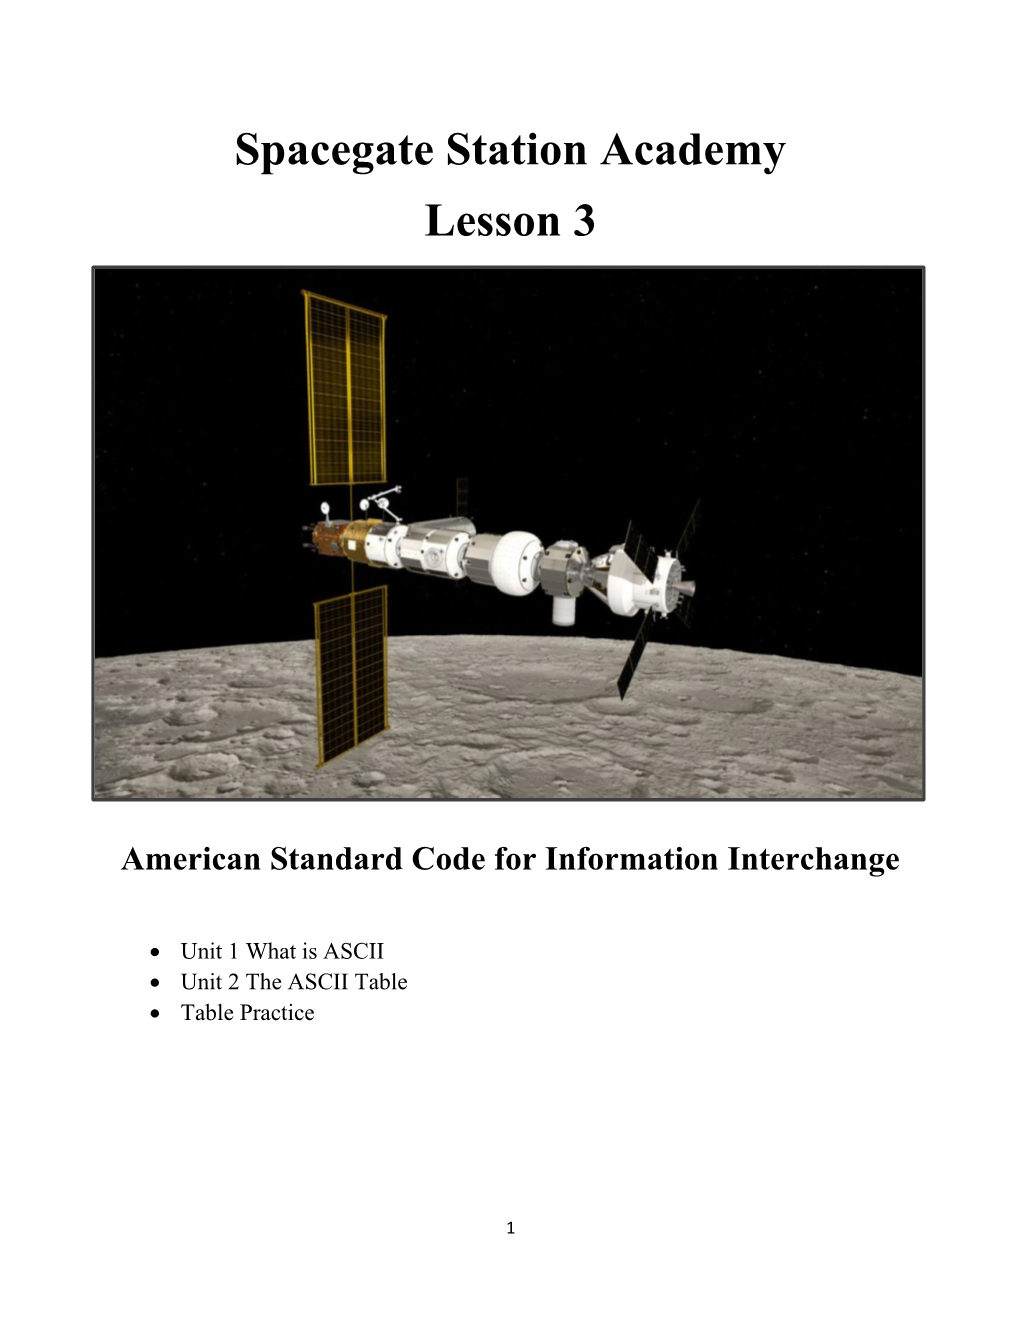 Spacegate Station Academy Lesson 3